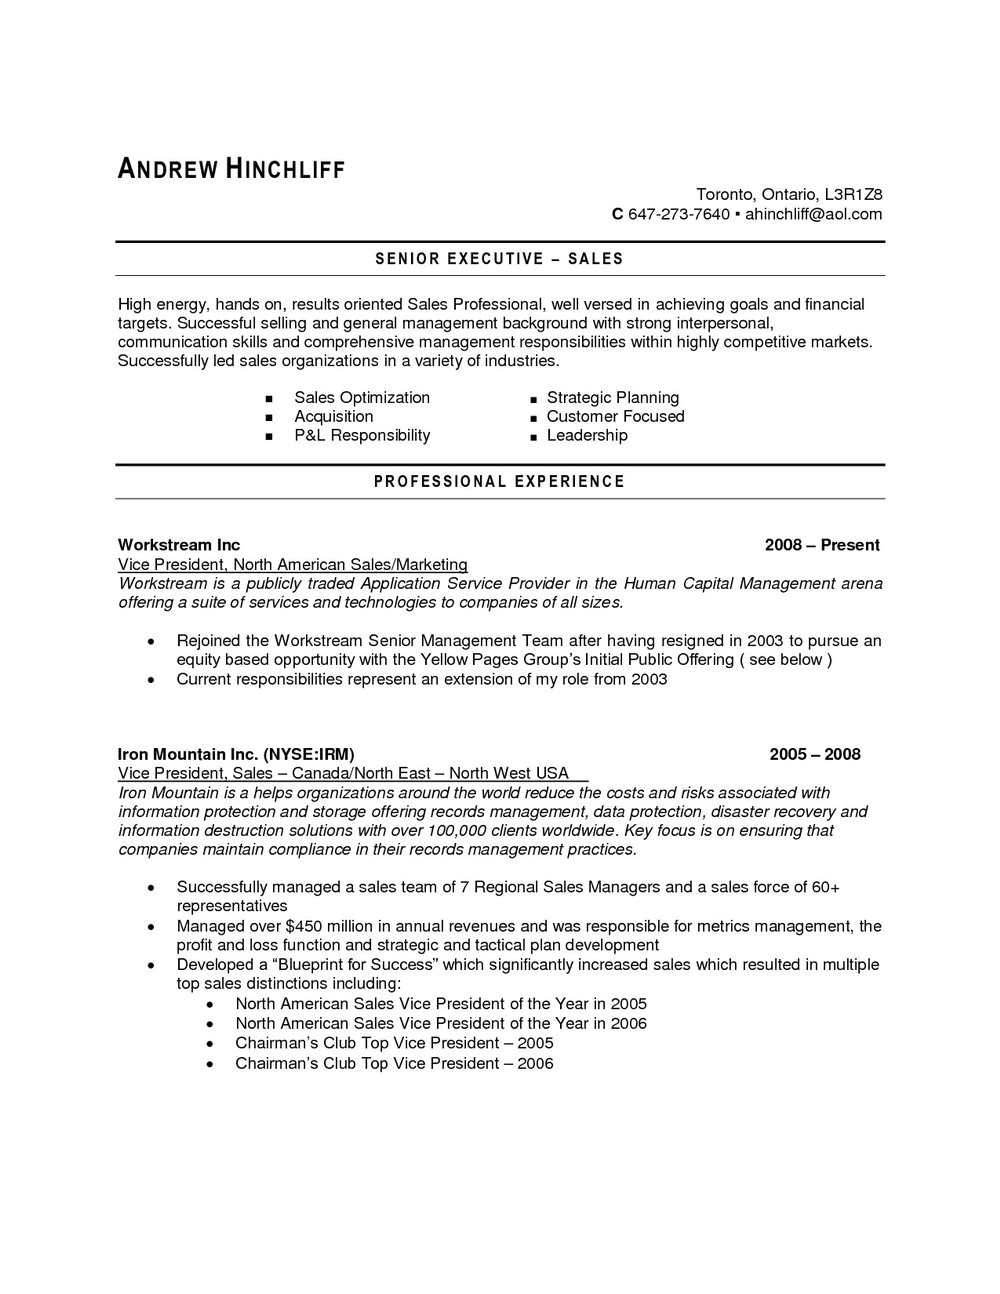 Resume format for Canada Jobs Sample Resume for Jobs In Canada Mbm Legal